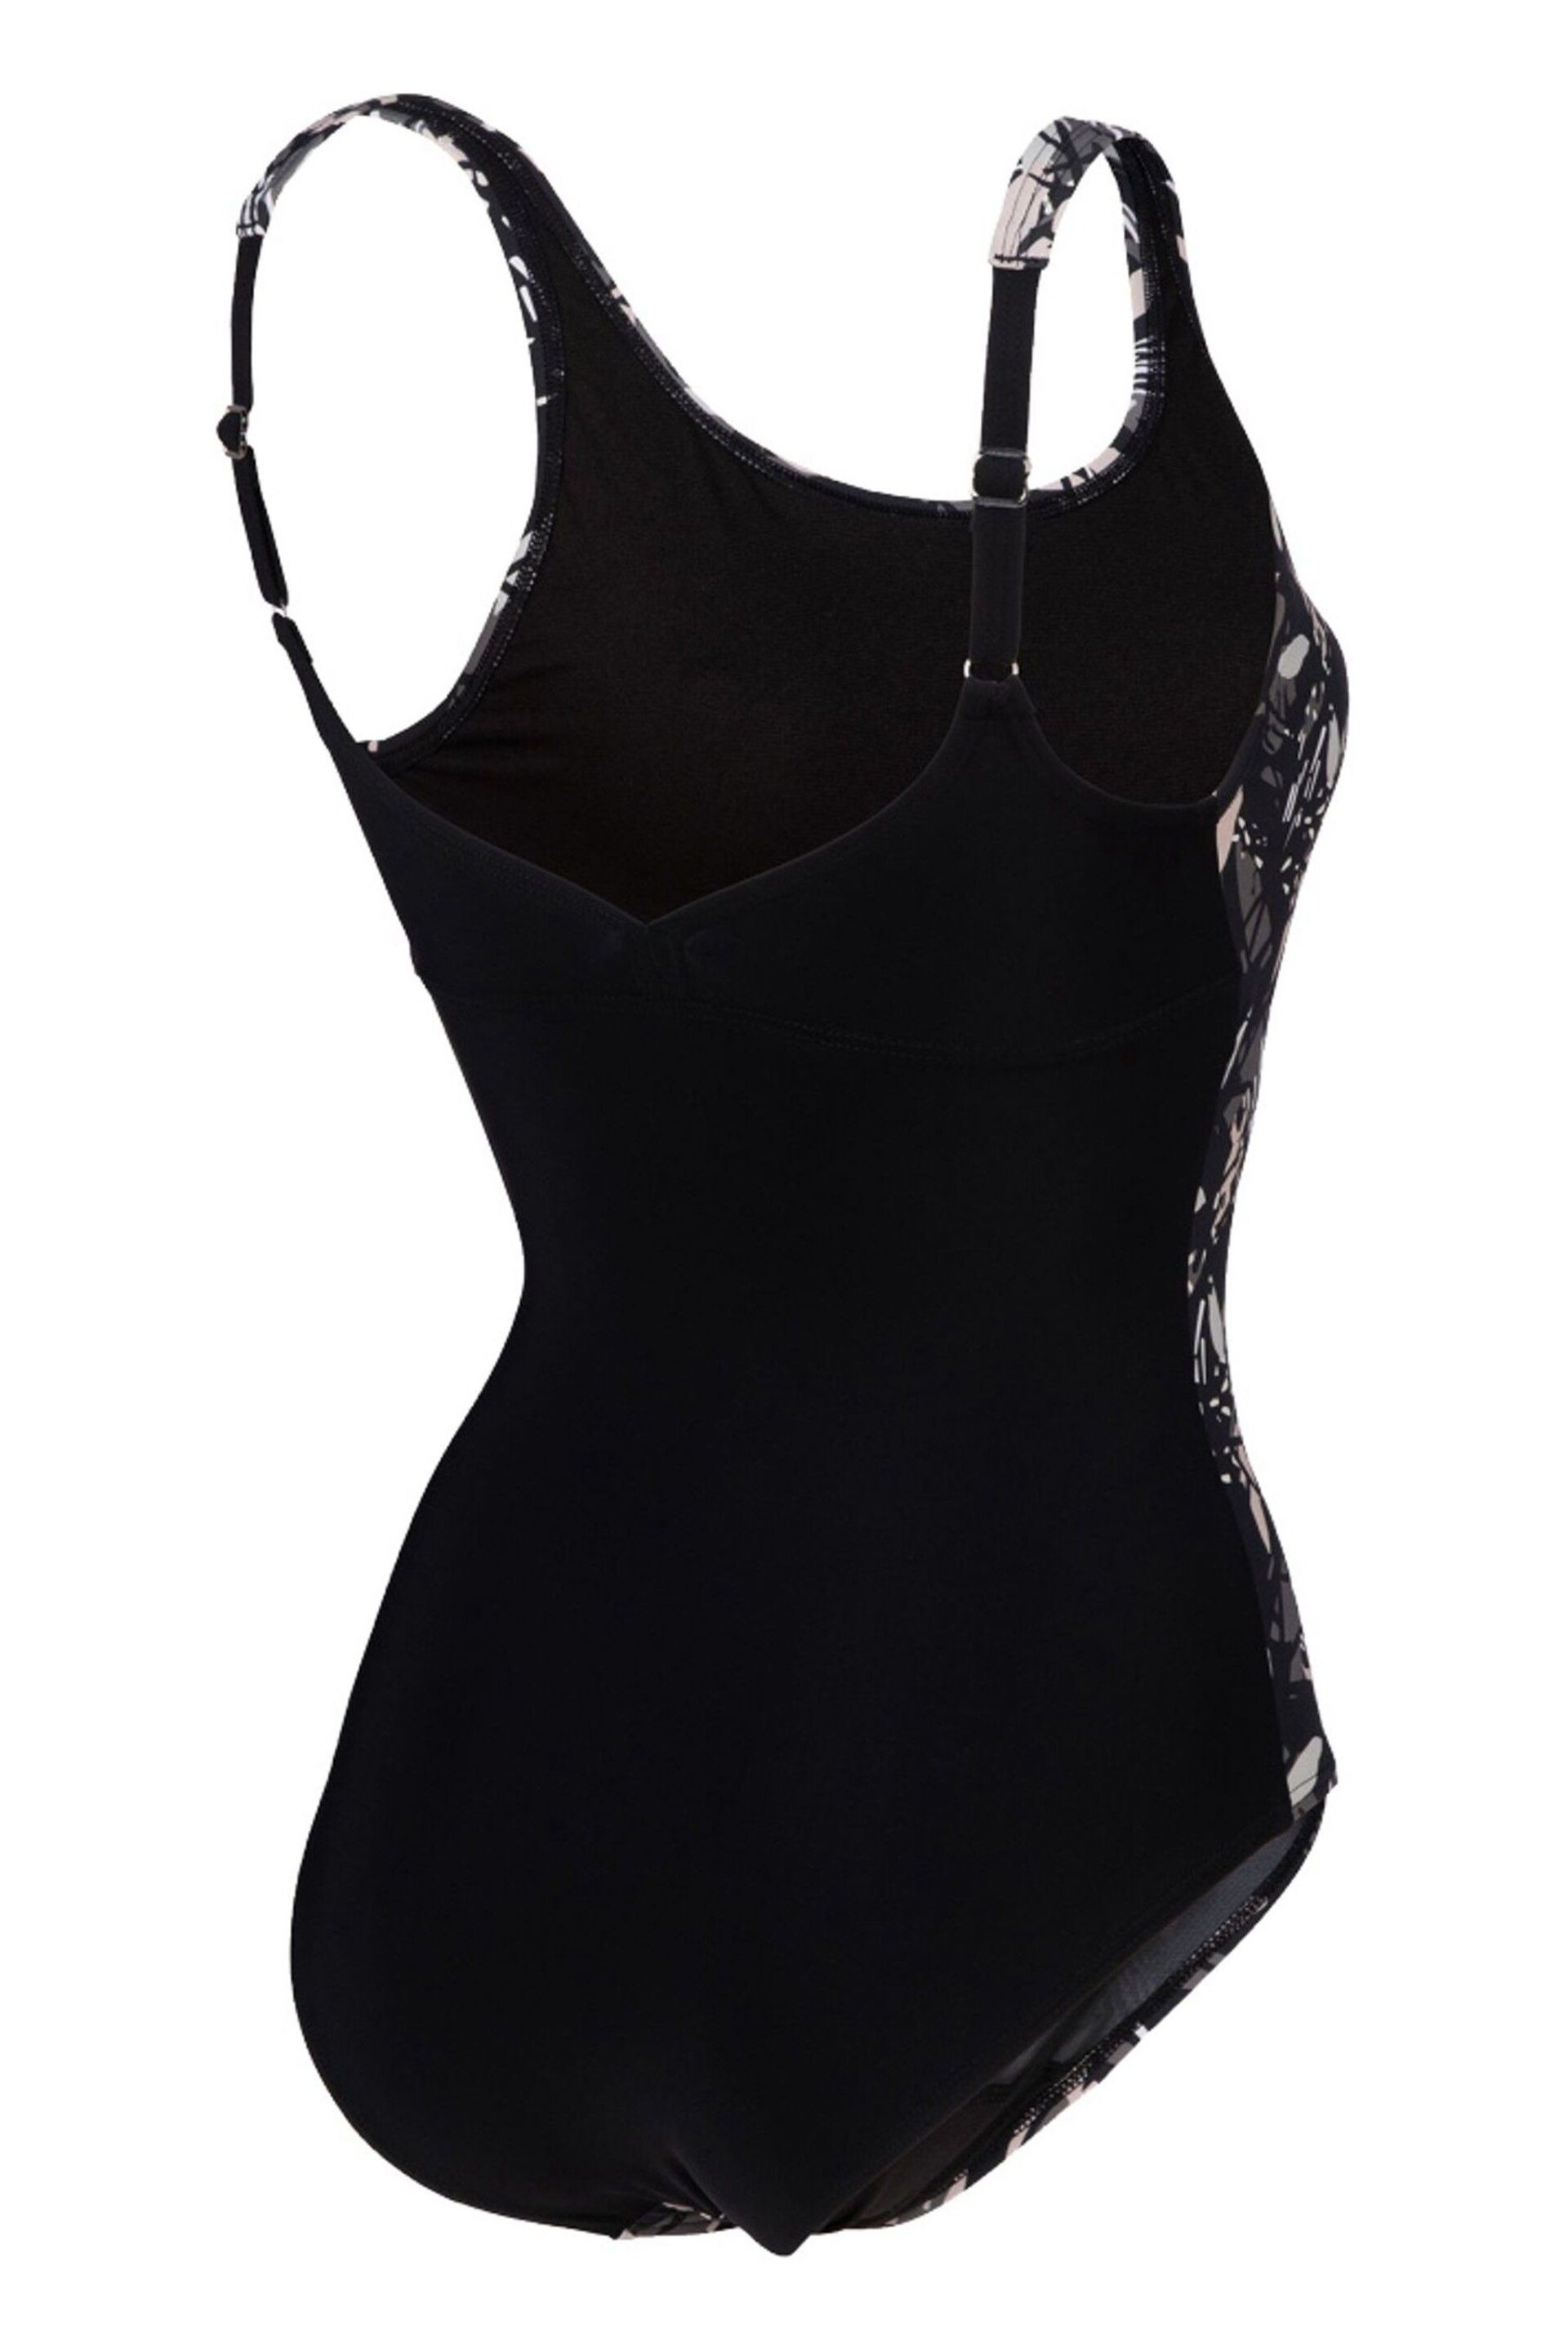 Arena Bodylift Womens Francy Wing Back B-Cup Black Swimsuit - Image 6 of 6